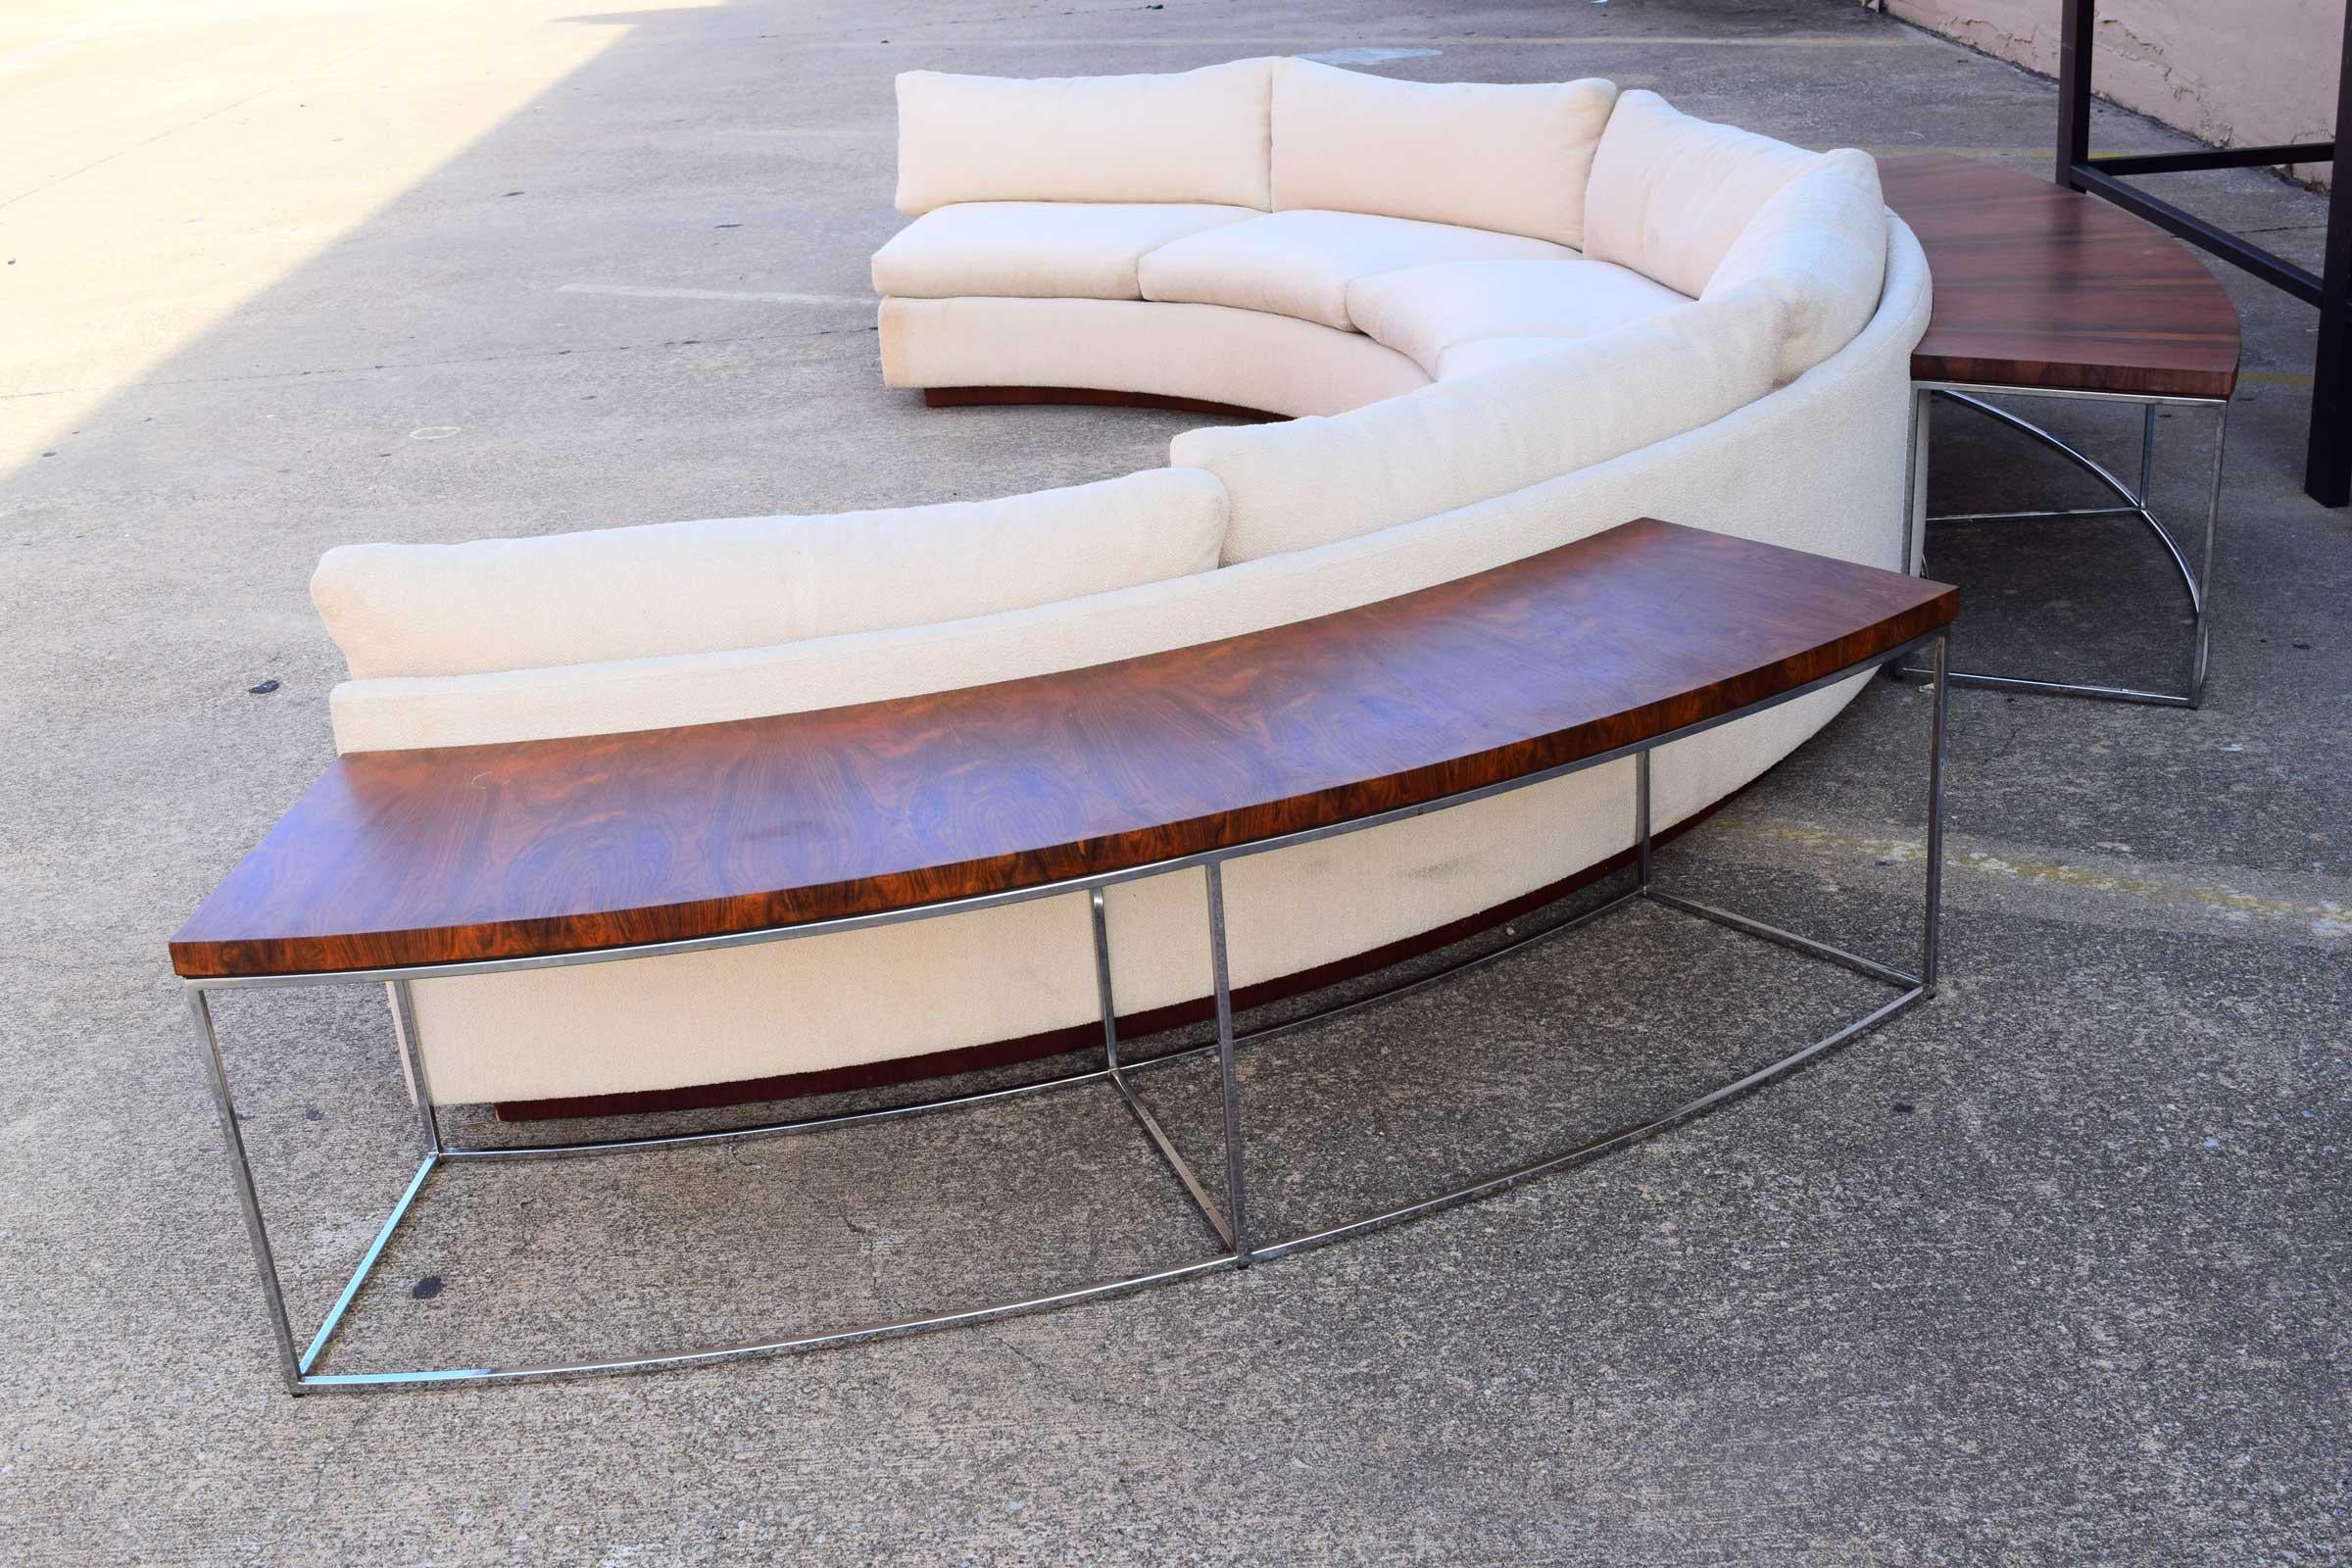 Upholstery Milo Baughman Curved Sectional Sofa in Off-White with Rosewood Tables